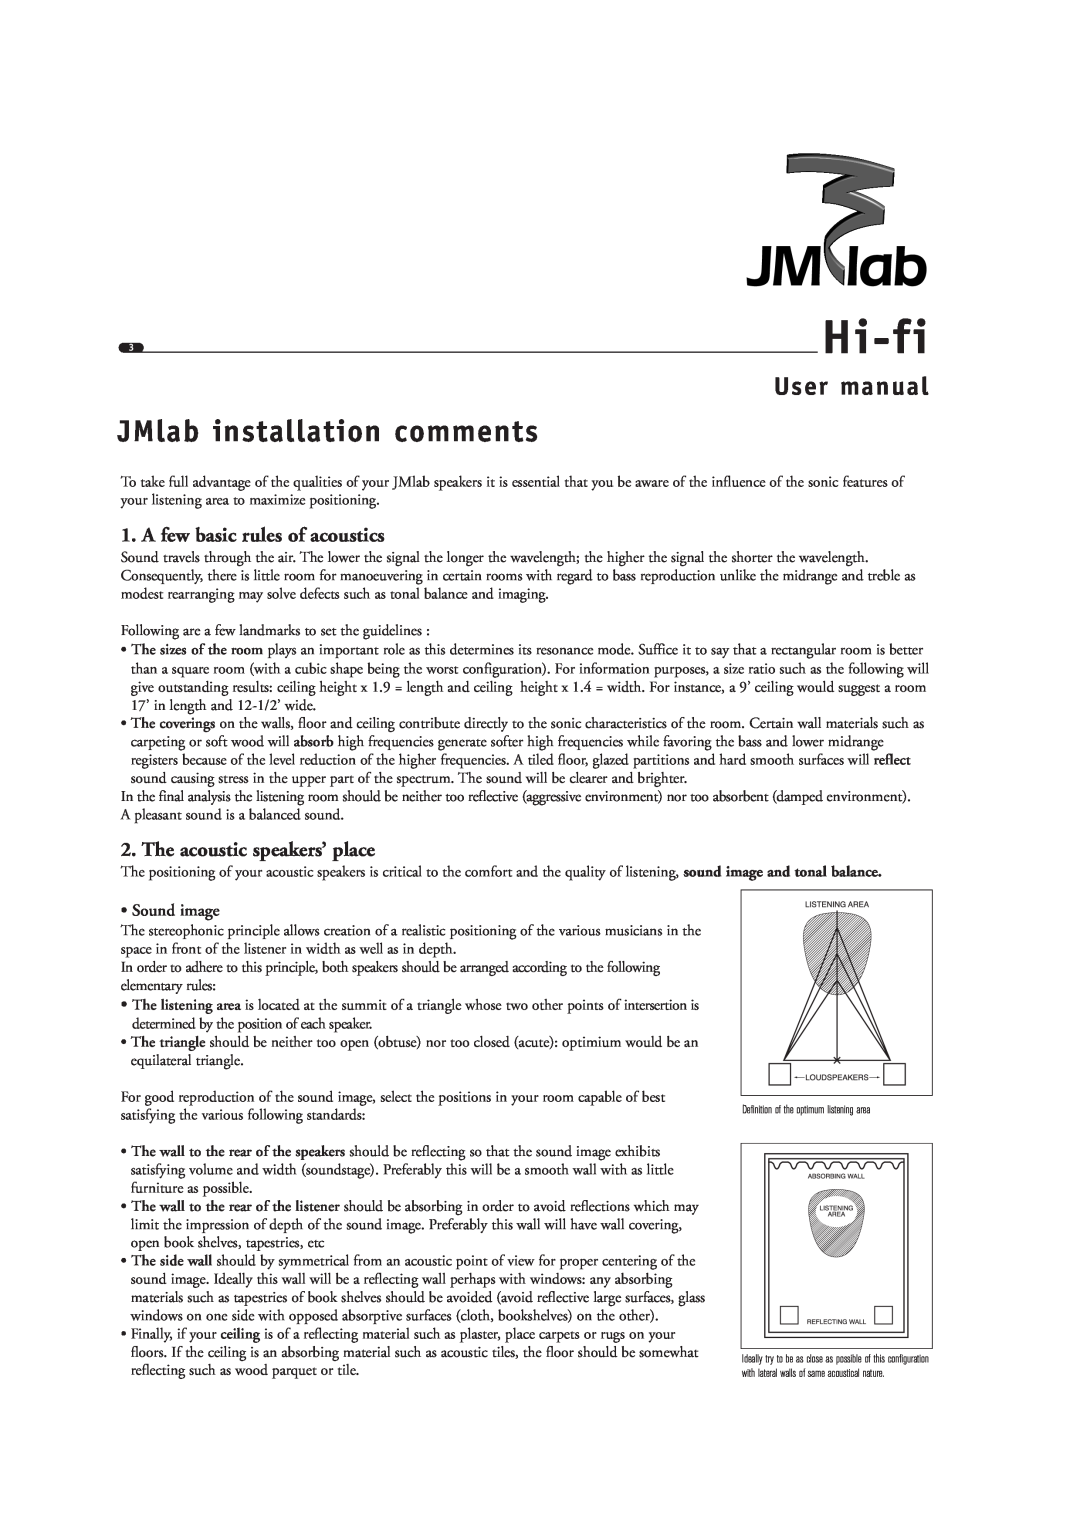 Focal Hi-fi JMlab installation comments, User manual, A few basic rules of acoustics, The acoustic speakers’ place 